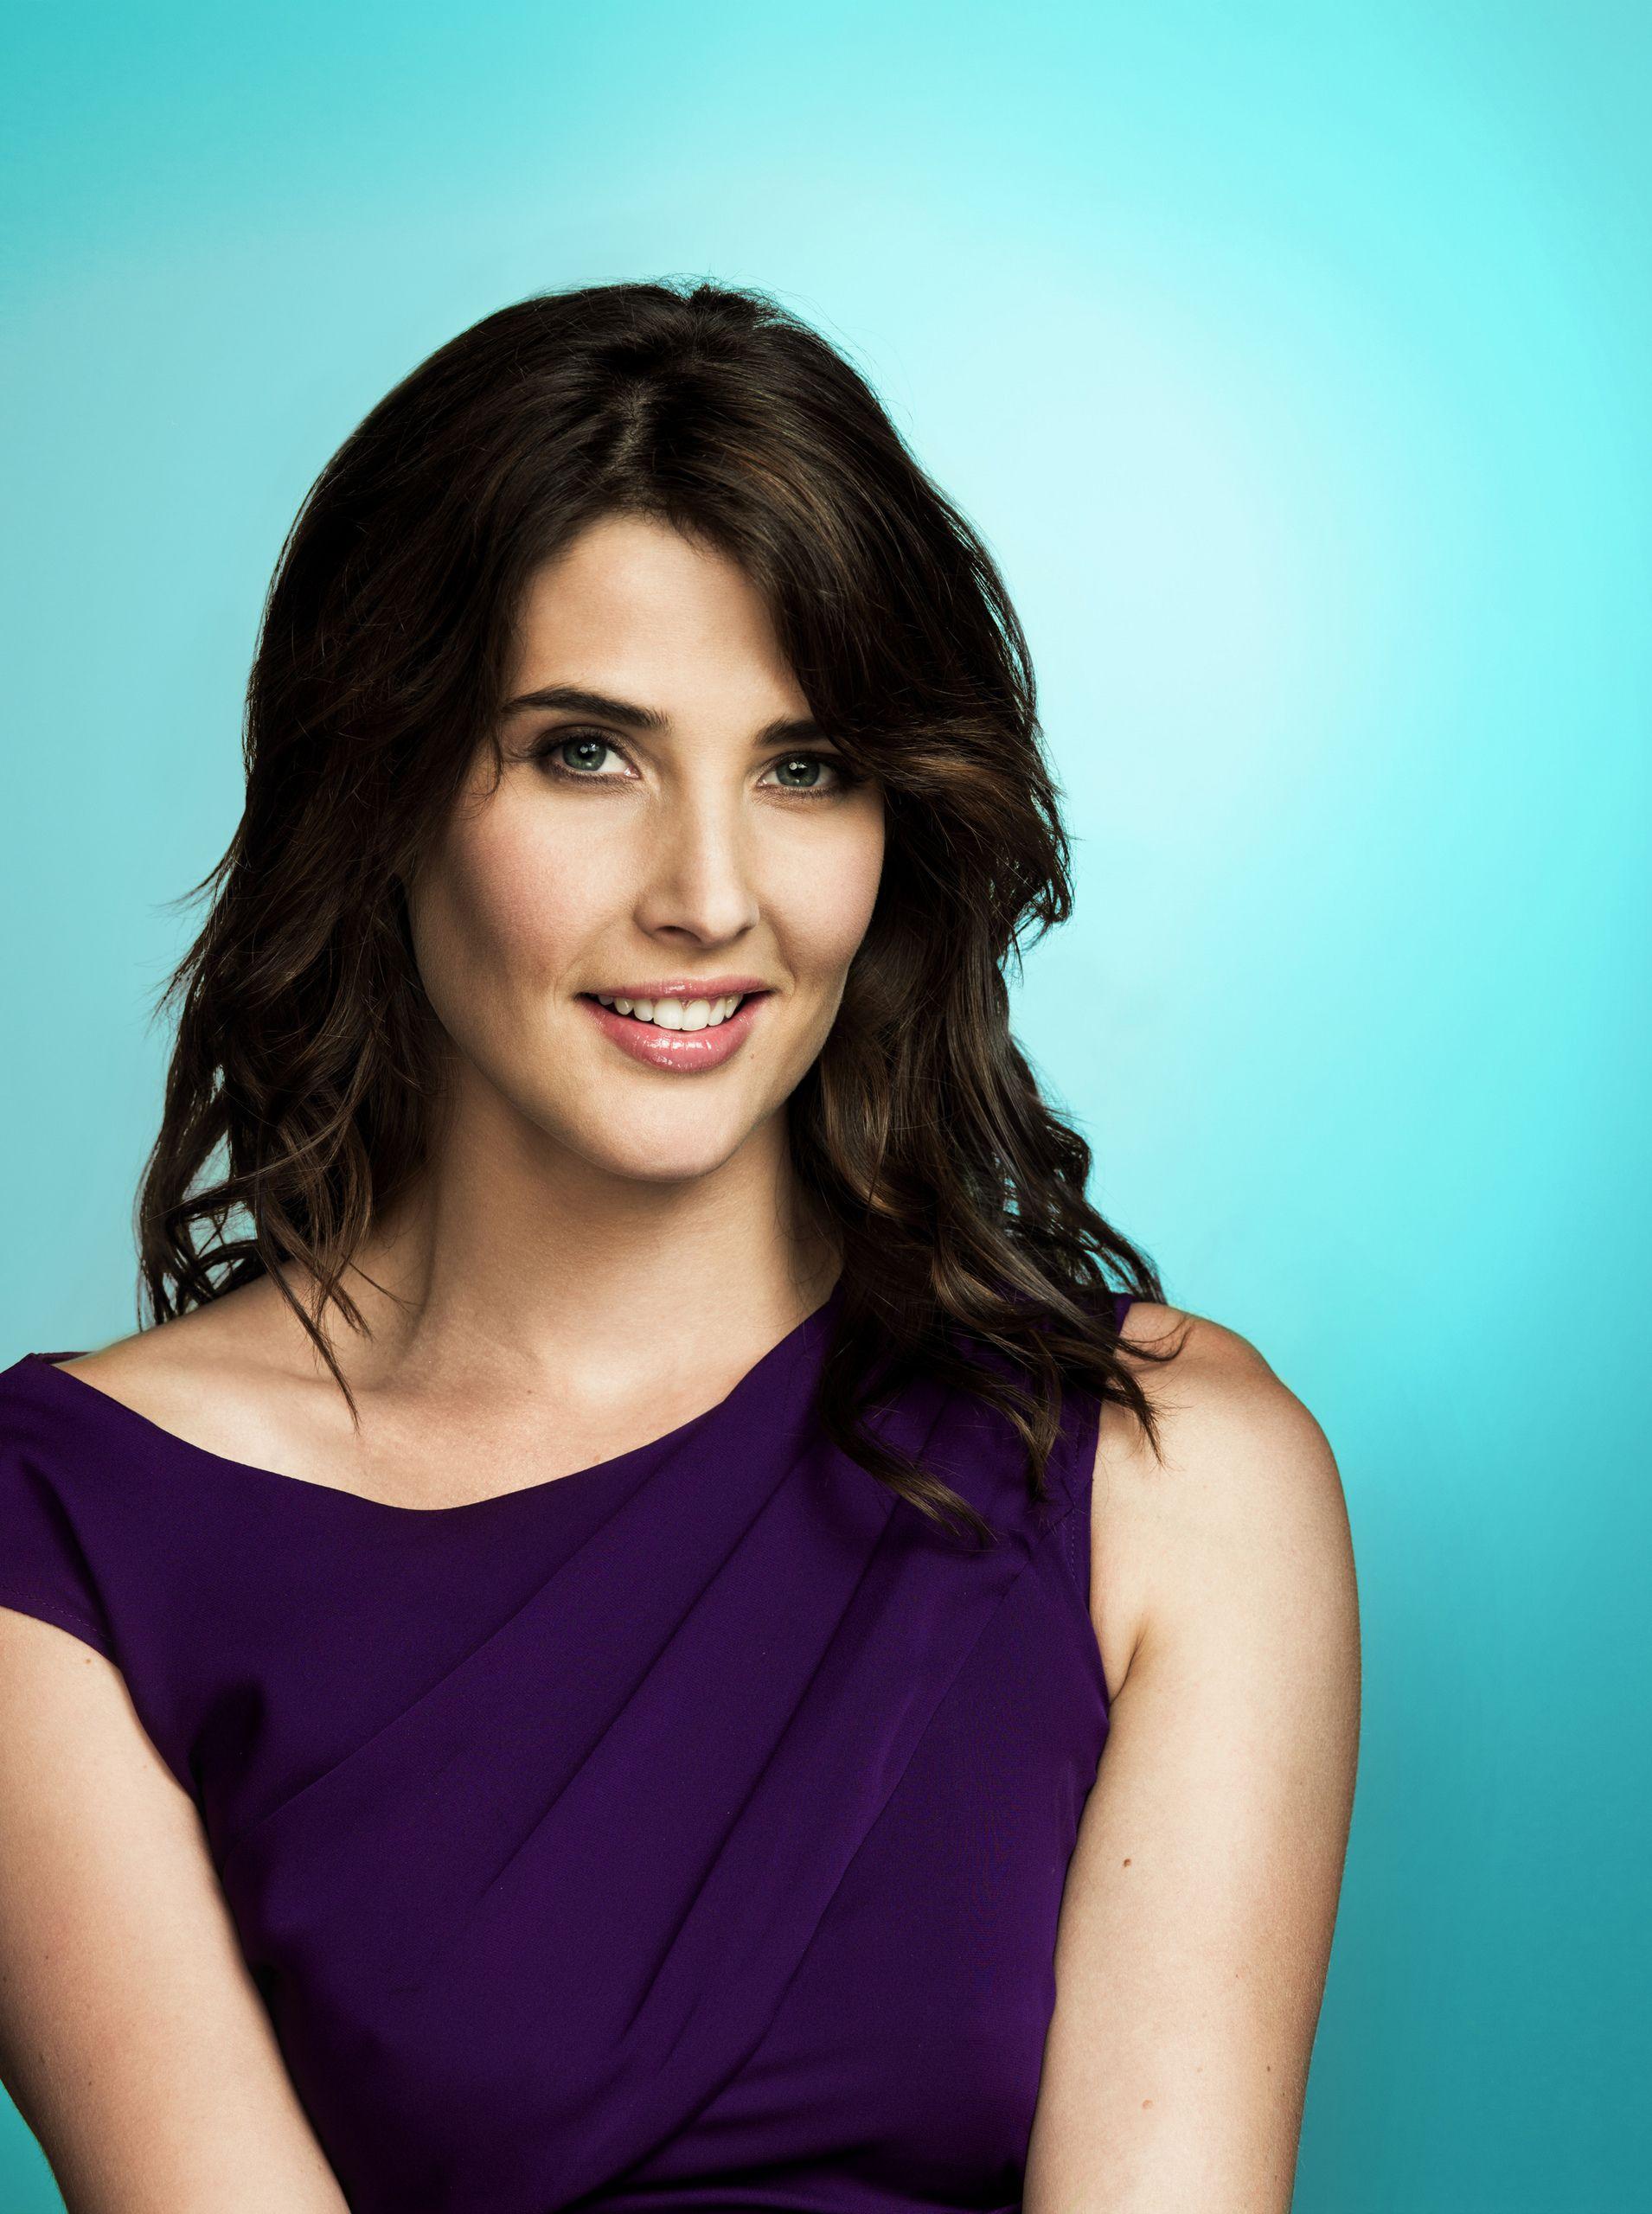 cobie smulders. Cobie Smulders Cobie Smulders. Cobie Smulders